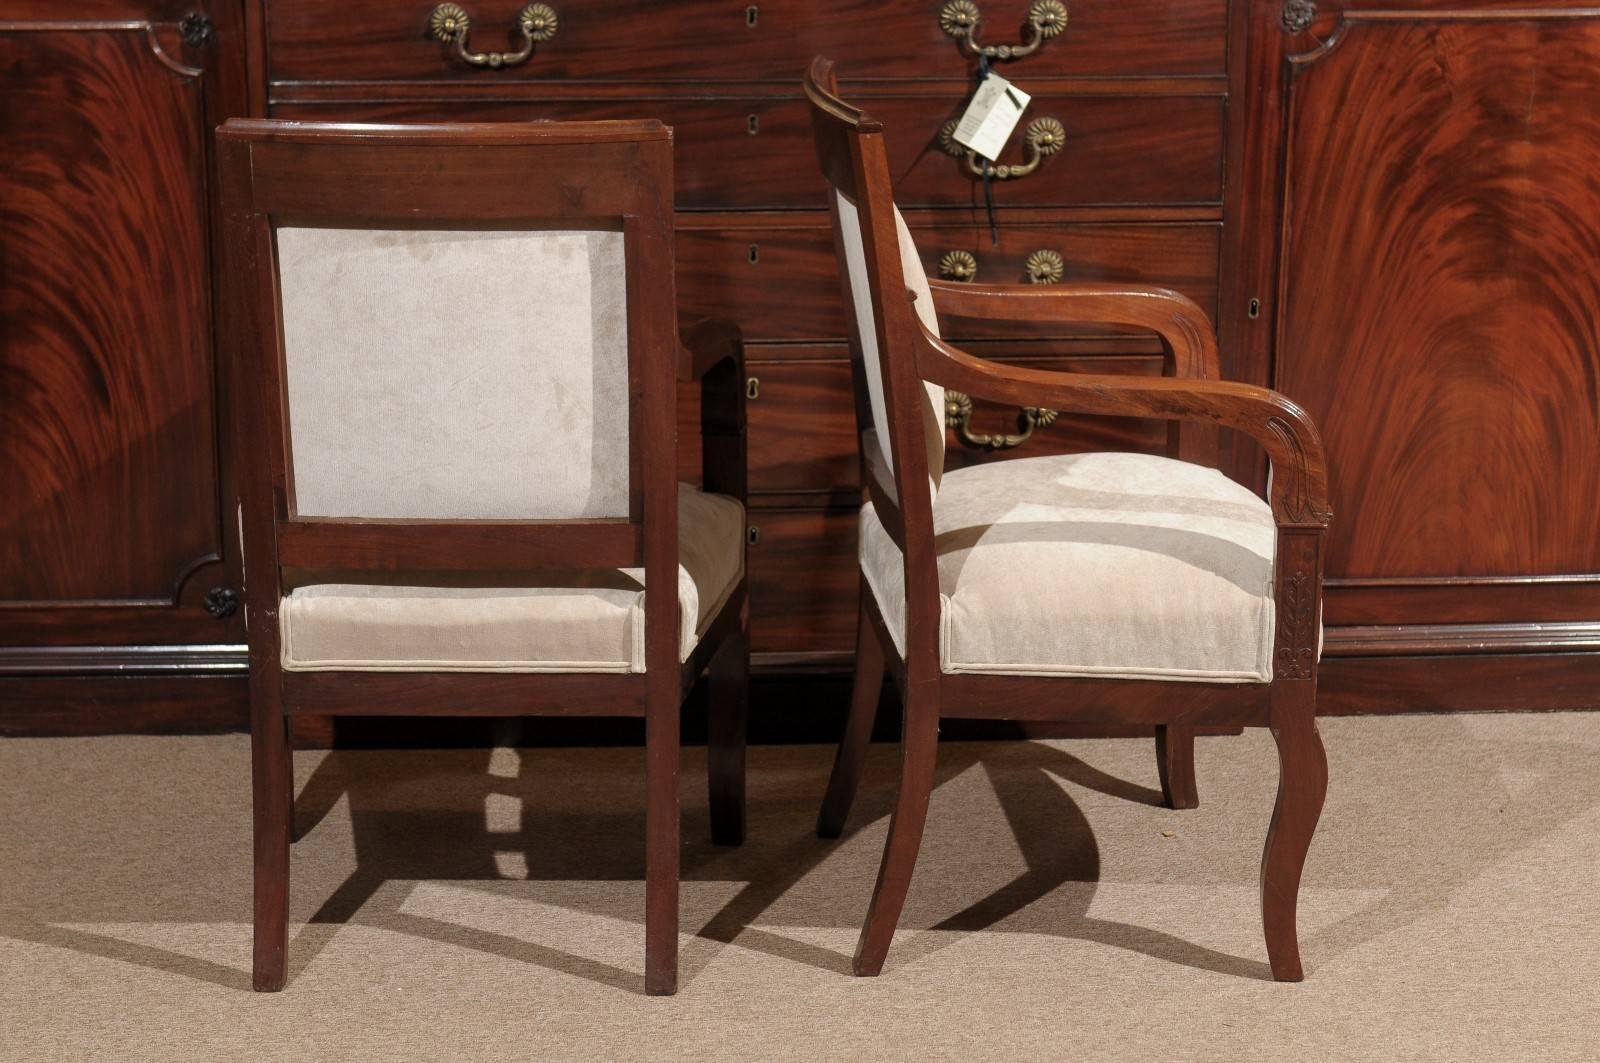 Pair of French Empire Mahogany Fauteuils, 19th Century, circa 1810 For Sale 5